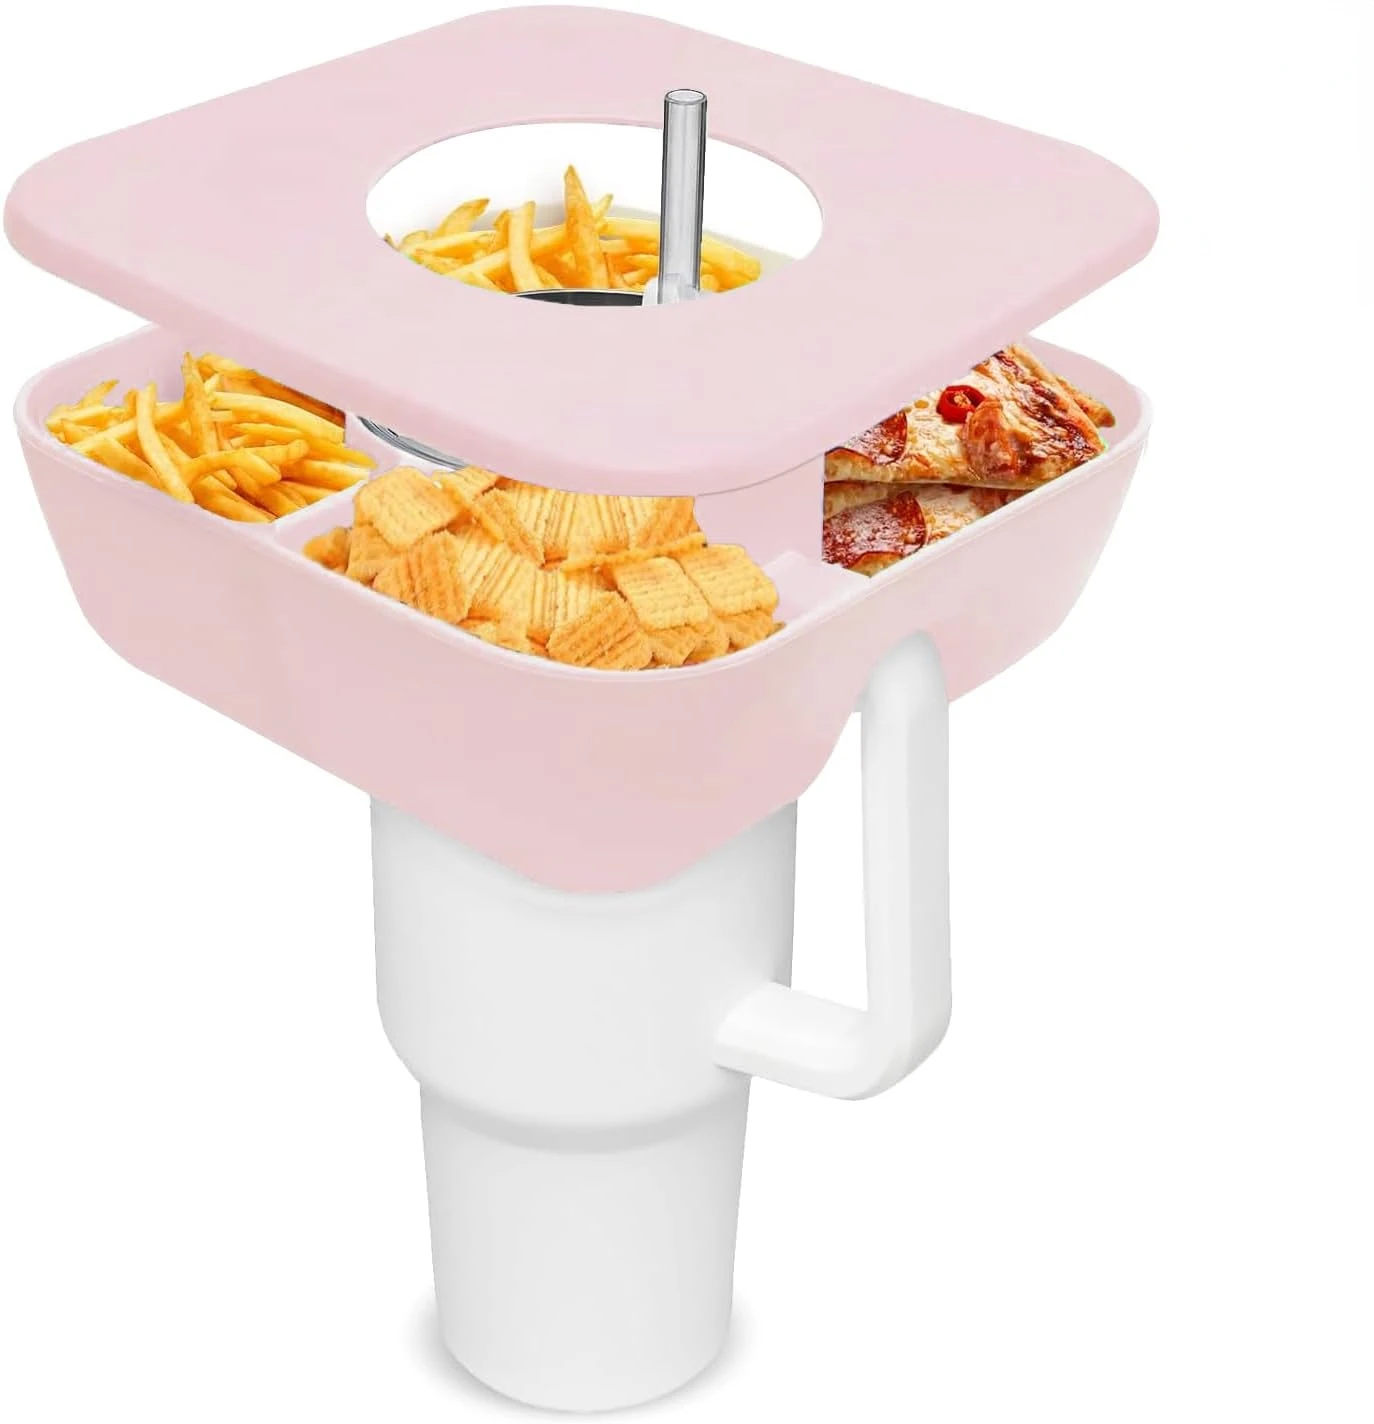 Snack Bowl for Stanley Cup,Reusable Tray for Tumbler Snack Snack Tray for Candy,Appetizer,Nuts,Popcorn,Cup Holder for Outdoor Color: 40oz-Pink 